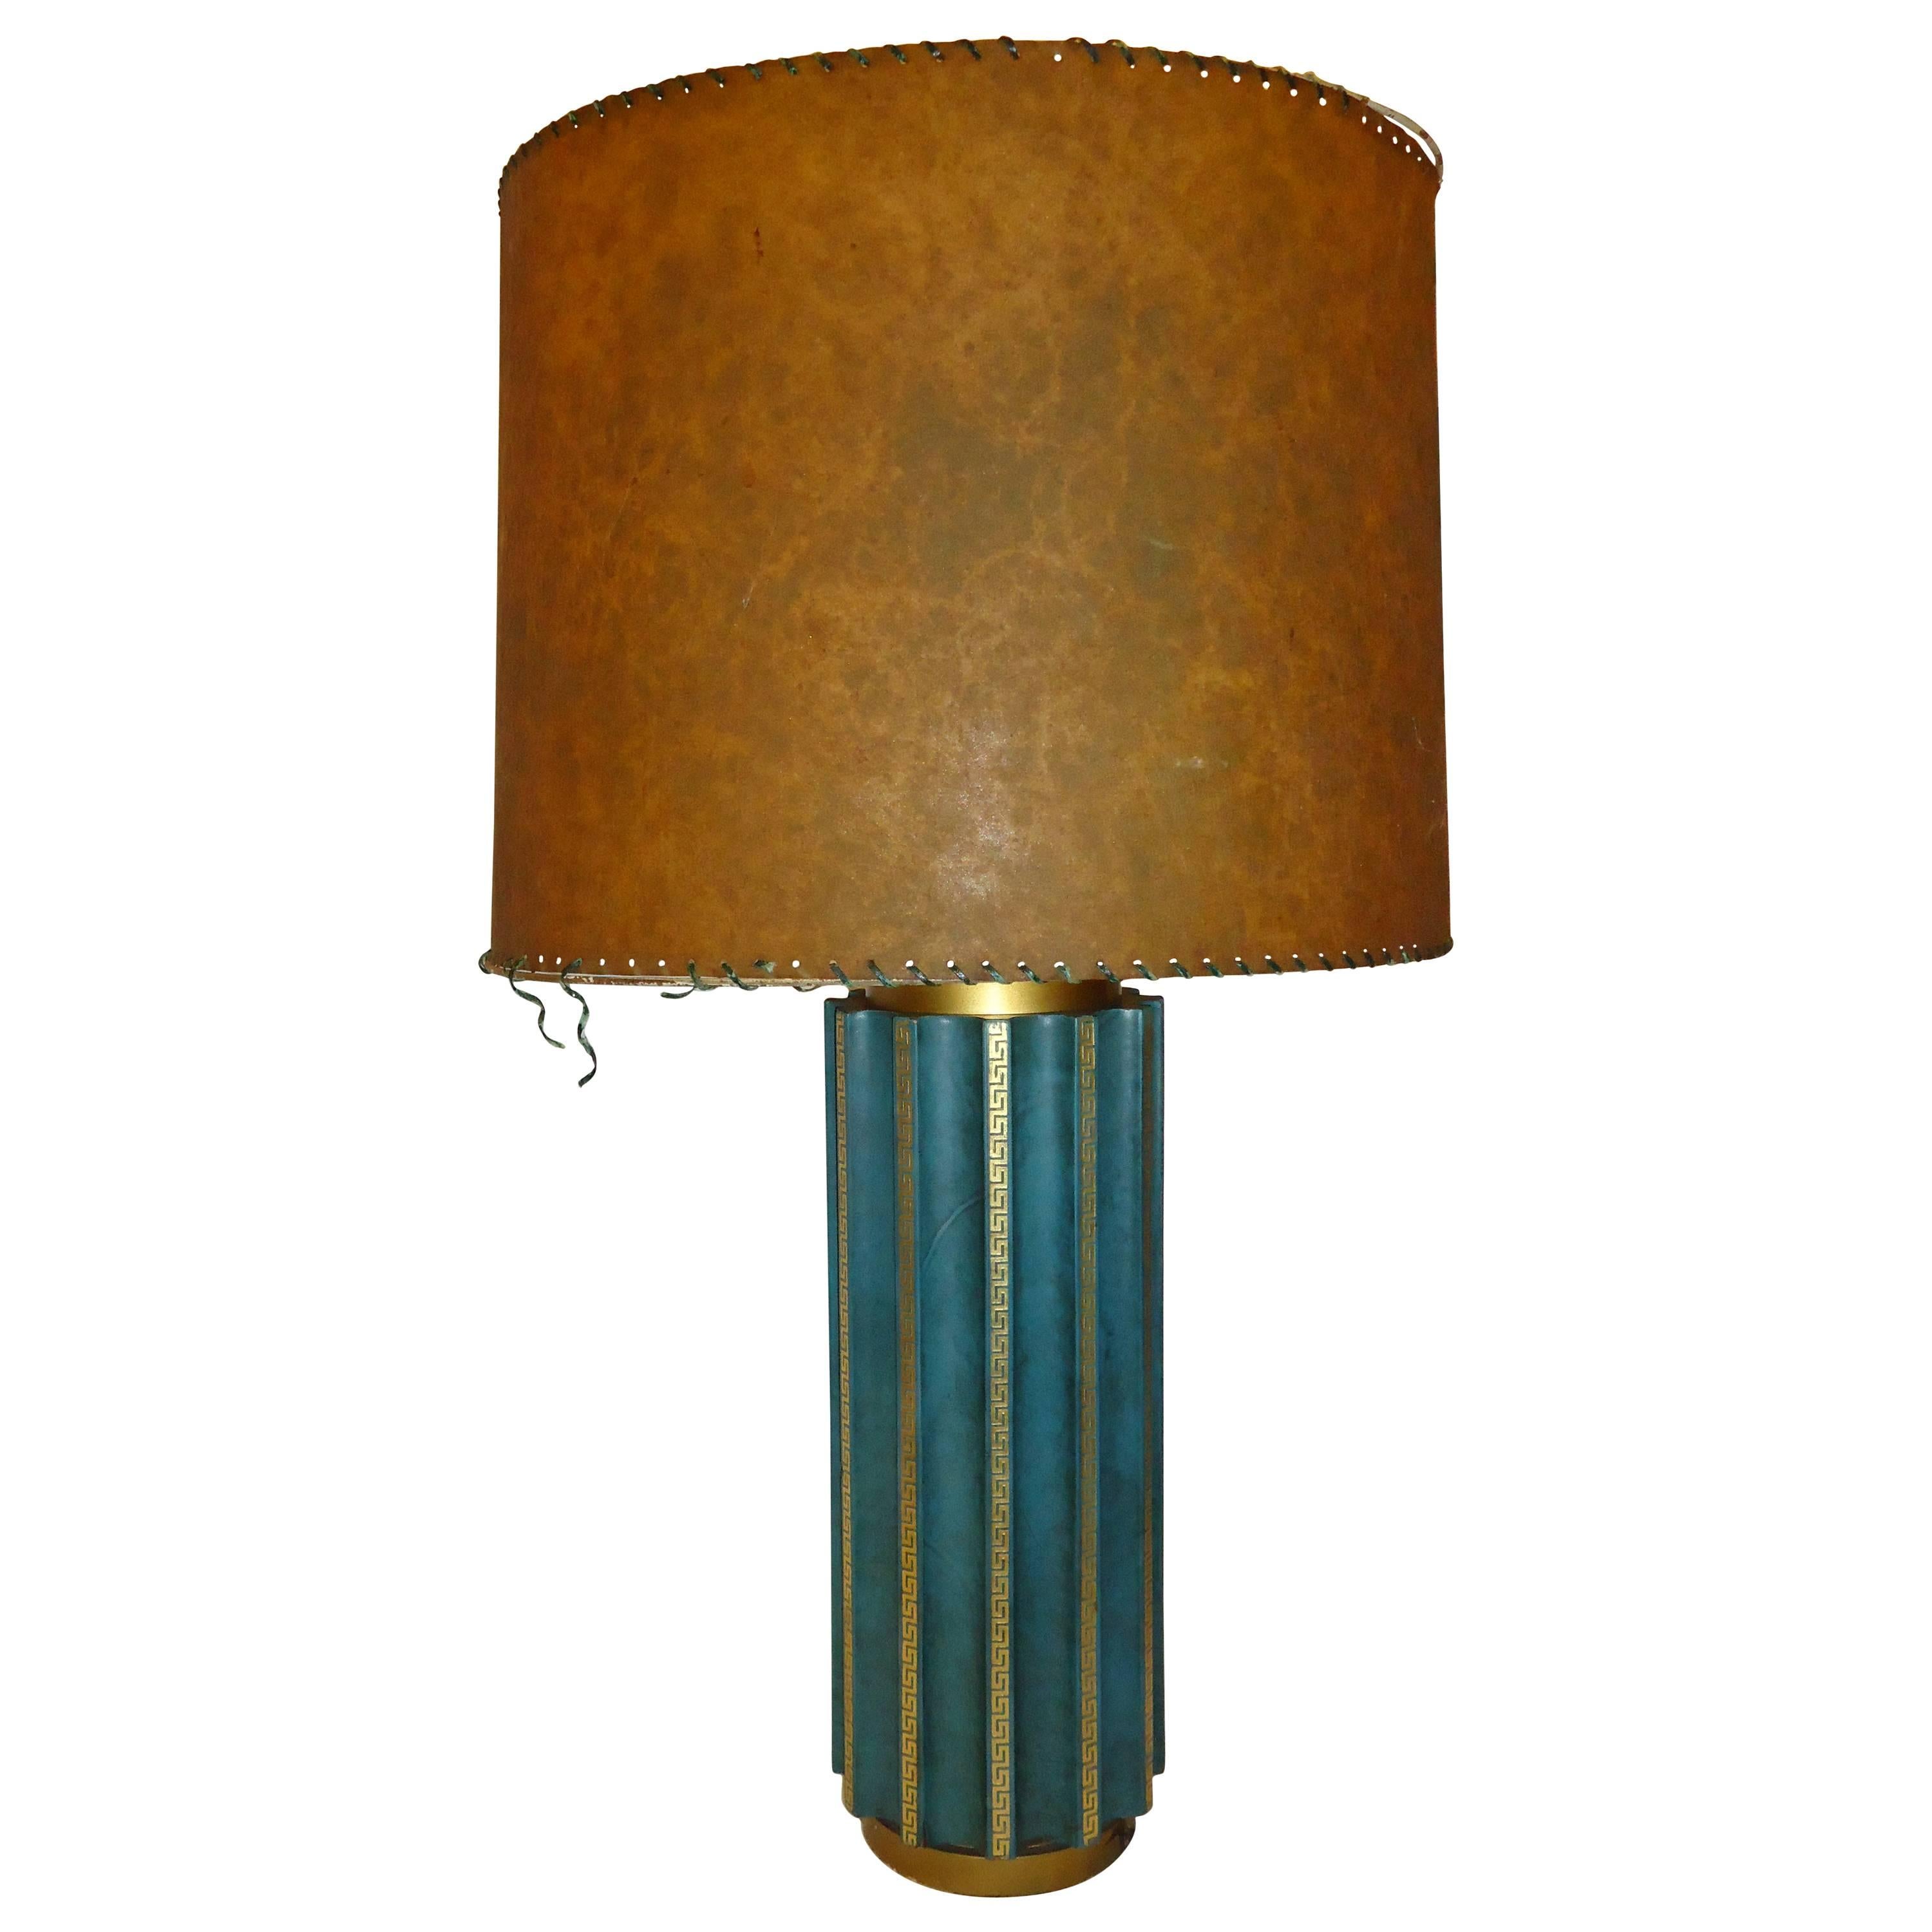 Unusual neoclassic fluted teal green leather cased table lamp in the style of Tommi Parzinger. 
Beautiful green dyed lambskin or goatskin leather covered lamp body that is  fluted with striking vertical lines of embossed gilt Greek key decoration on